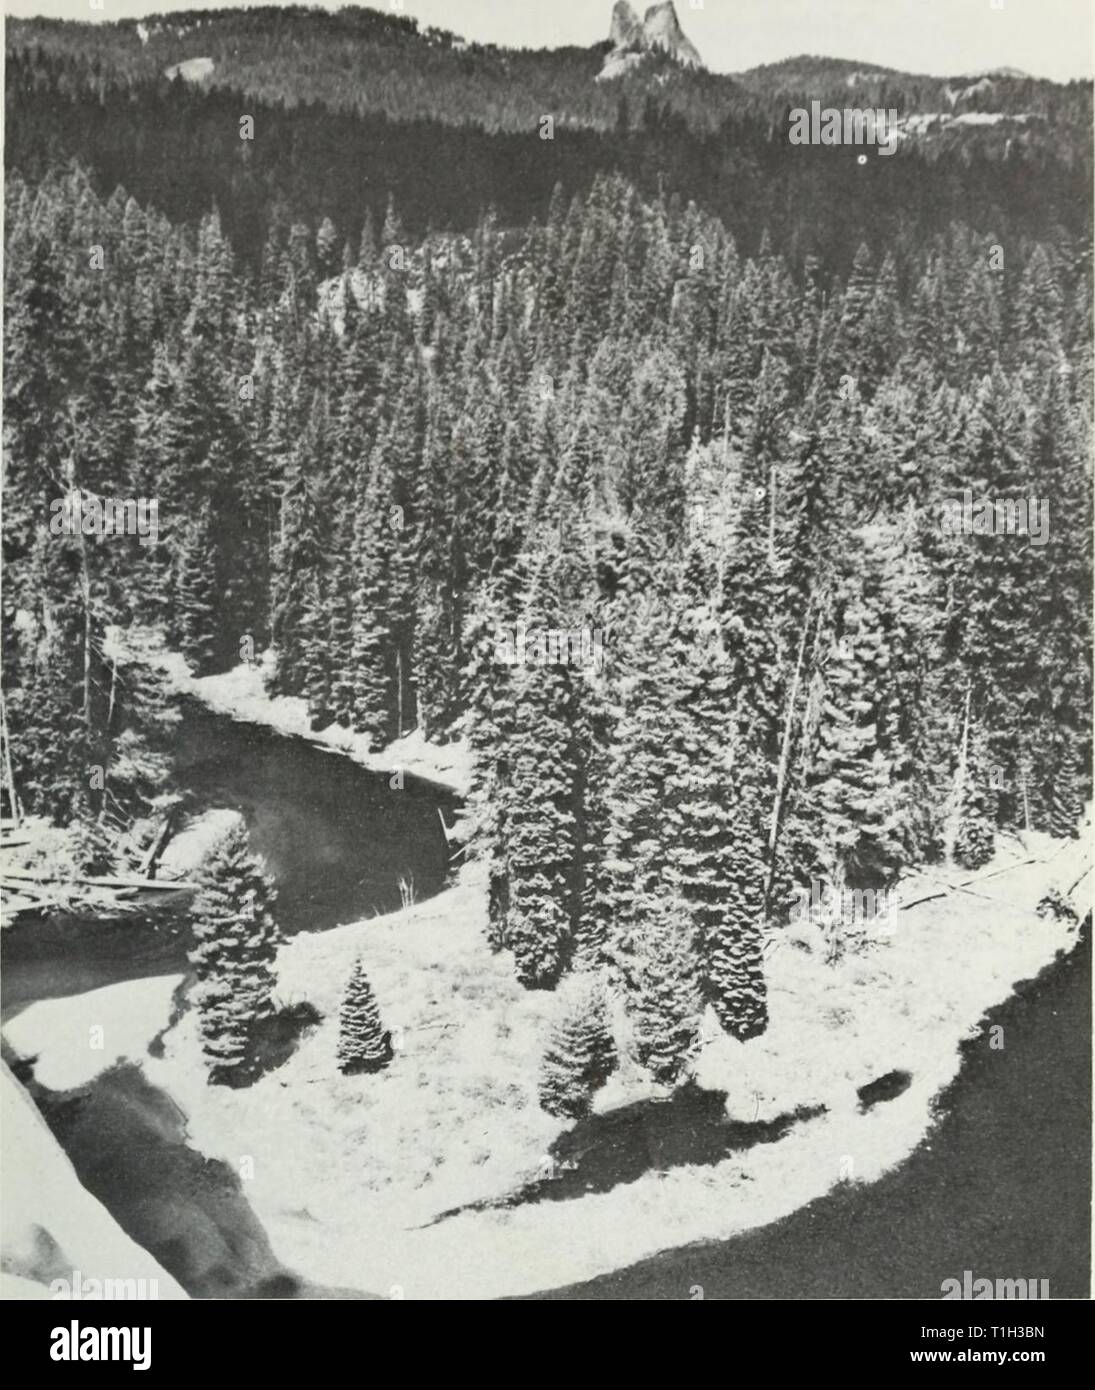 The distribution and occurrence of The distribution and occurrence of the birds of Jackson County, Oregon, and surrounding areas  distributionoccu70brow Year: 1975  BJKDS OF JACKSOX CO., 01{K(;0X, & Sl ltliOl XDIXO AltKAS 9    Fig. 5. Mixed Conifer Forest north of Union Creek at 1,219 m. Franklin and Dyrness (1973) differentiated this communitA' into two zones. The western Siskiou Mountains are considered to be in the Mixed-Evergreen {Pseudotsuga-'QQTo)) Zone. The most dominant tree species are Pseudotsuga menziesii and Lithocarpus densifloriis. The west slope of the Cascades and the ea Stock Photo